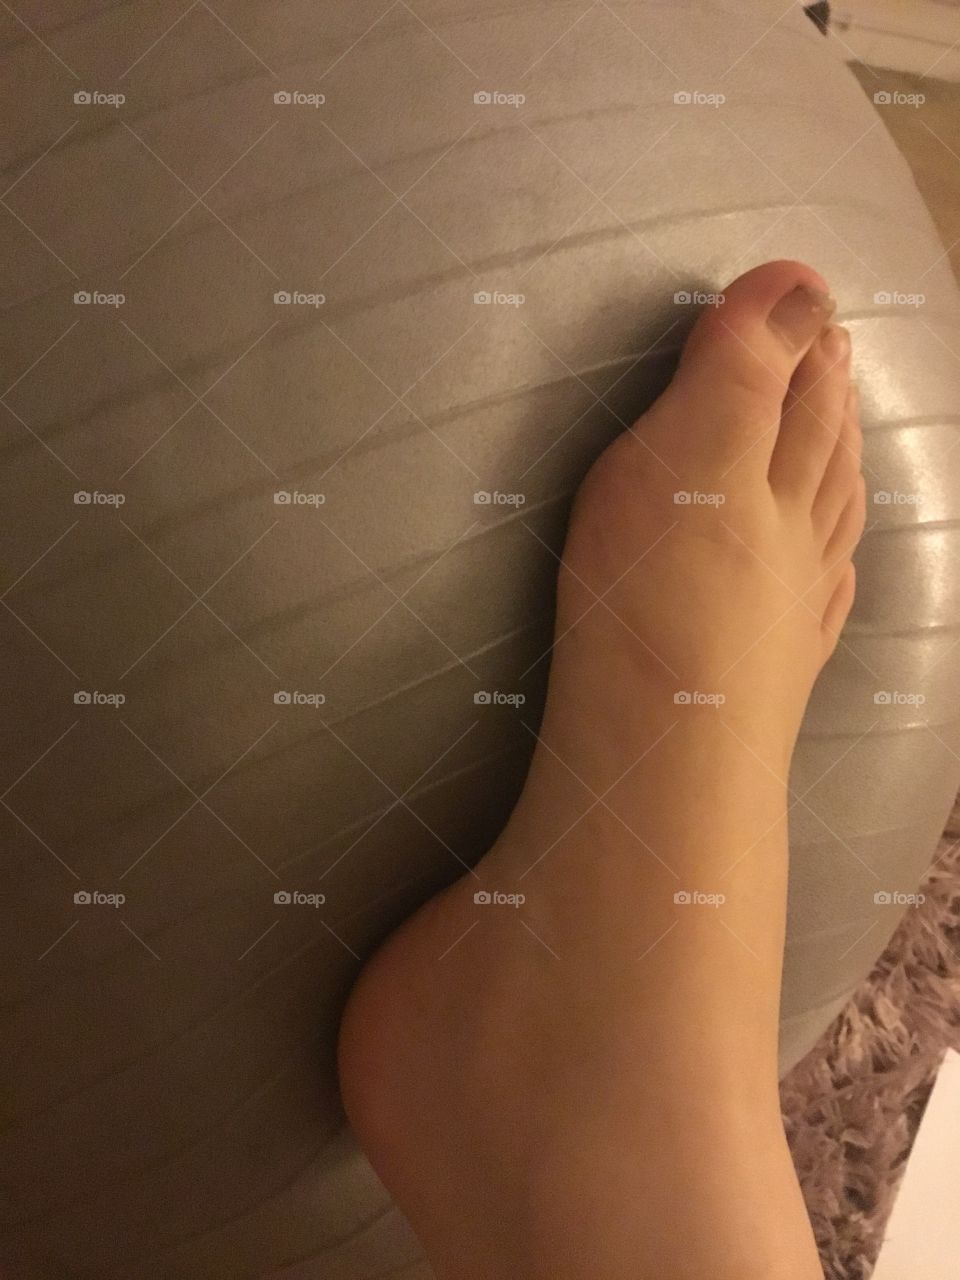 I sell photos of feet and boobs 